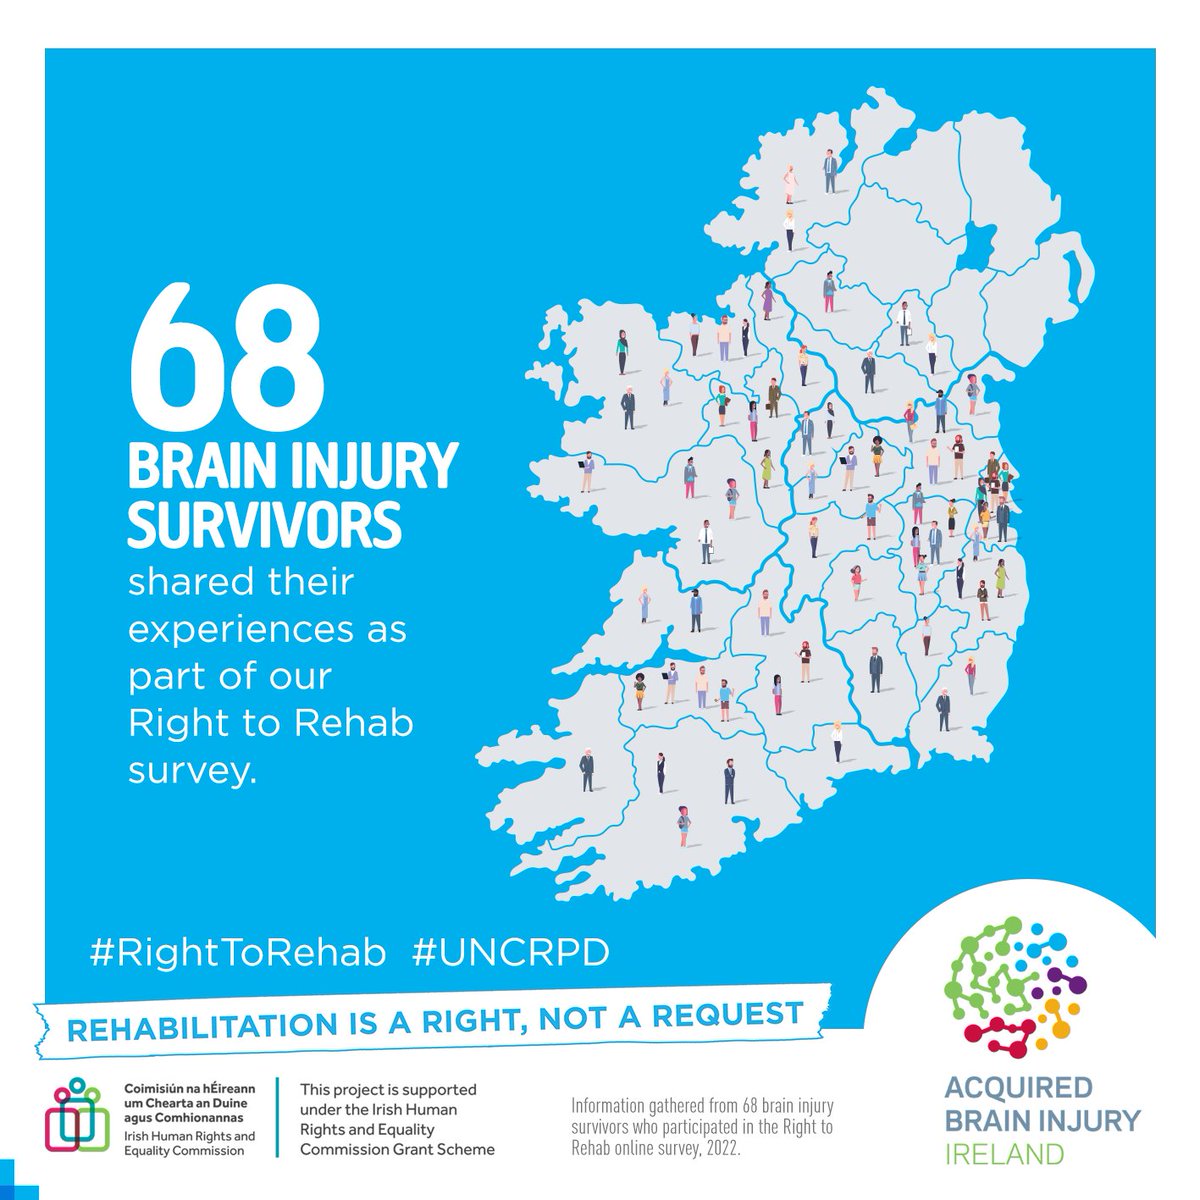 Results of our survey showed some of the most common symptoms of acquired brain injury. Imagine how frustrating it must be for survivors to live with these impacts. Rehabilitation can help rebuild their lives. Support the right to rehab! #braininjurysurvivor #IHRECsupported